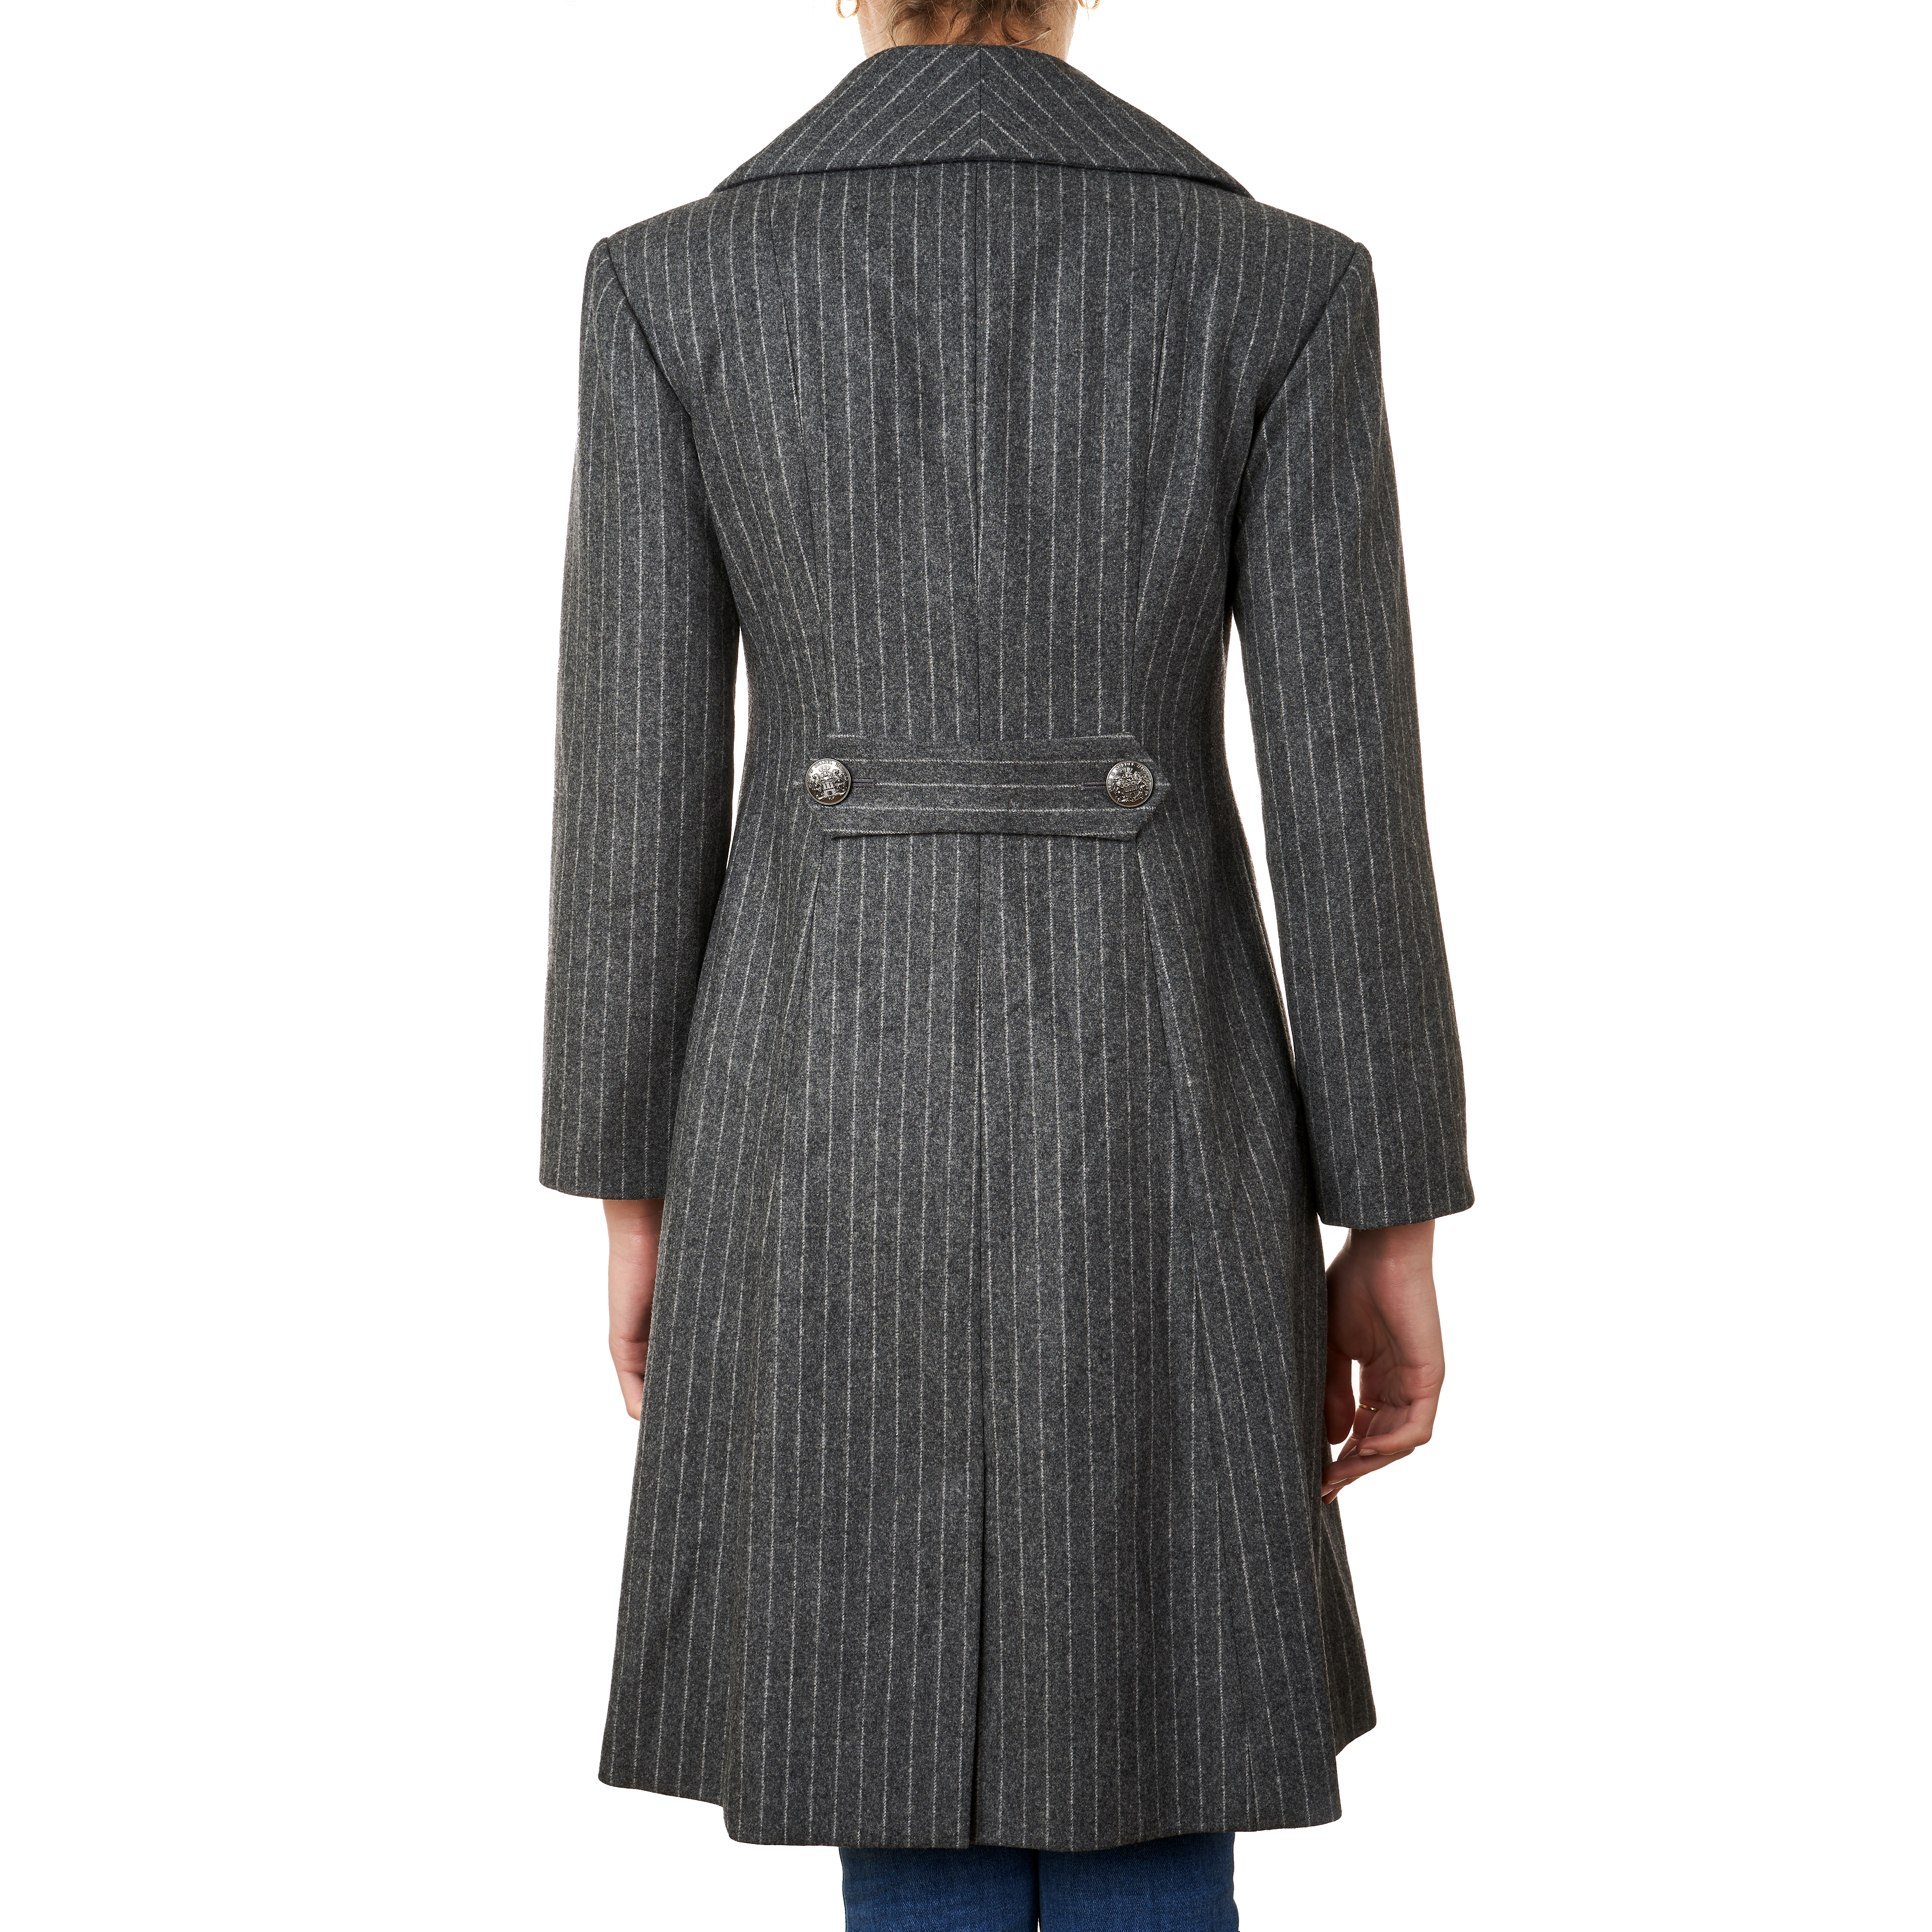 CHANEL GREY STRIPED PARIS-HAMBURG LONG COAT Condition grade A-. French size 36. 90cm chest, 105... - Image 2 of 3